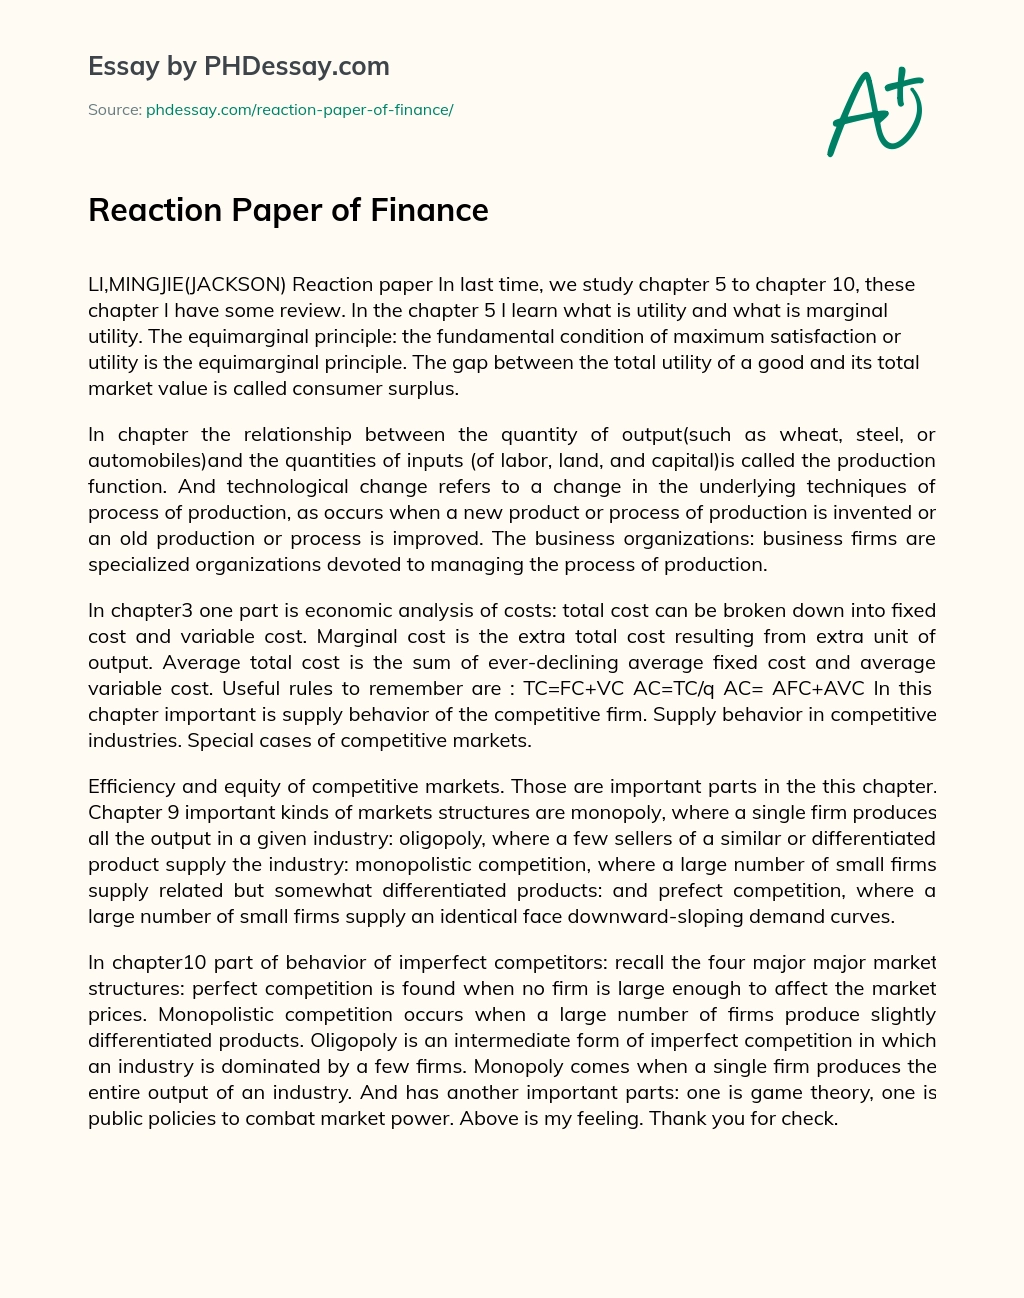 Reaction Paper of Finance essay